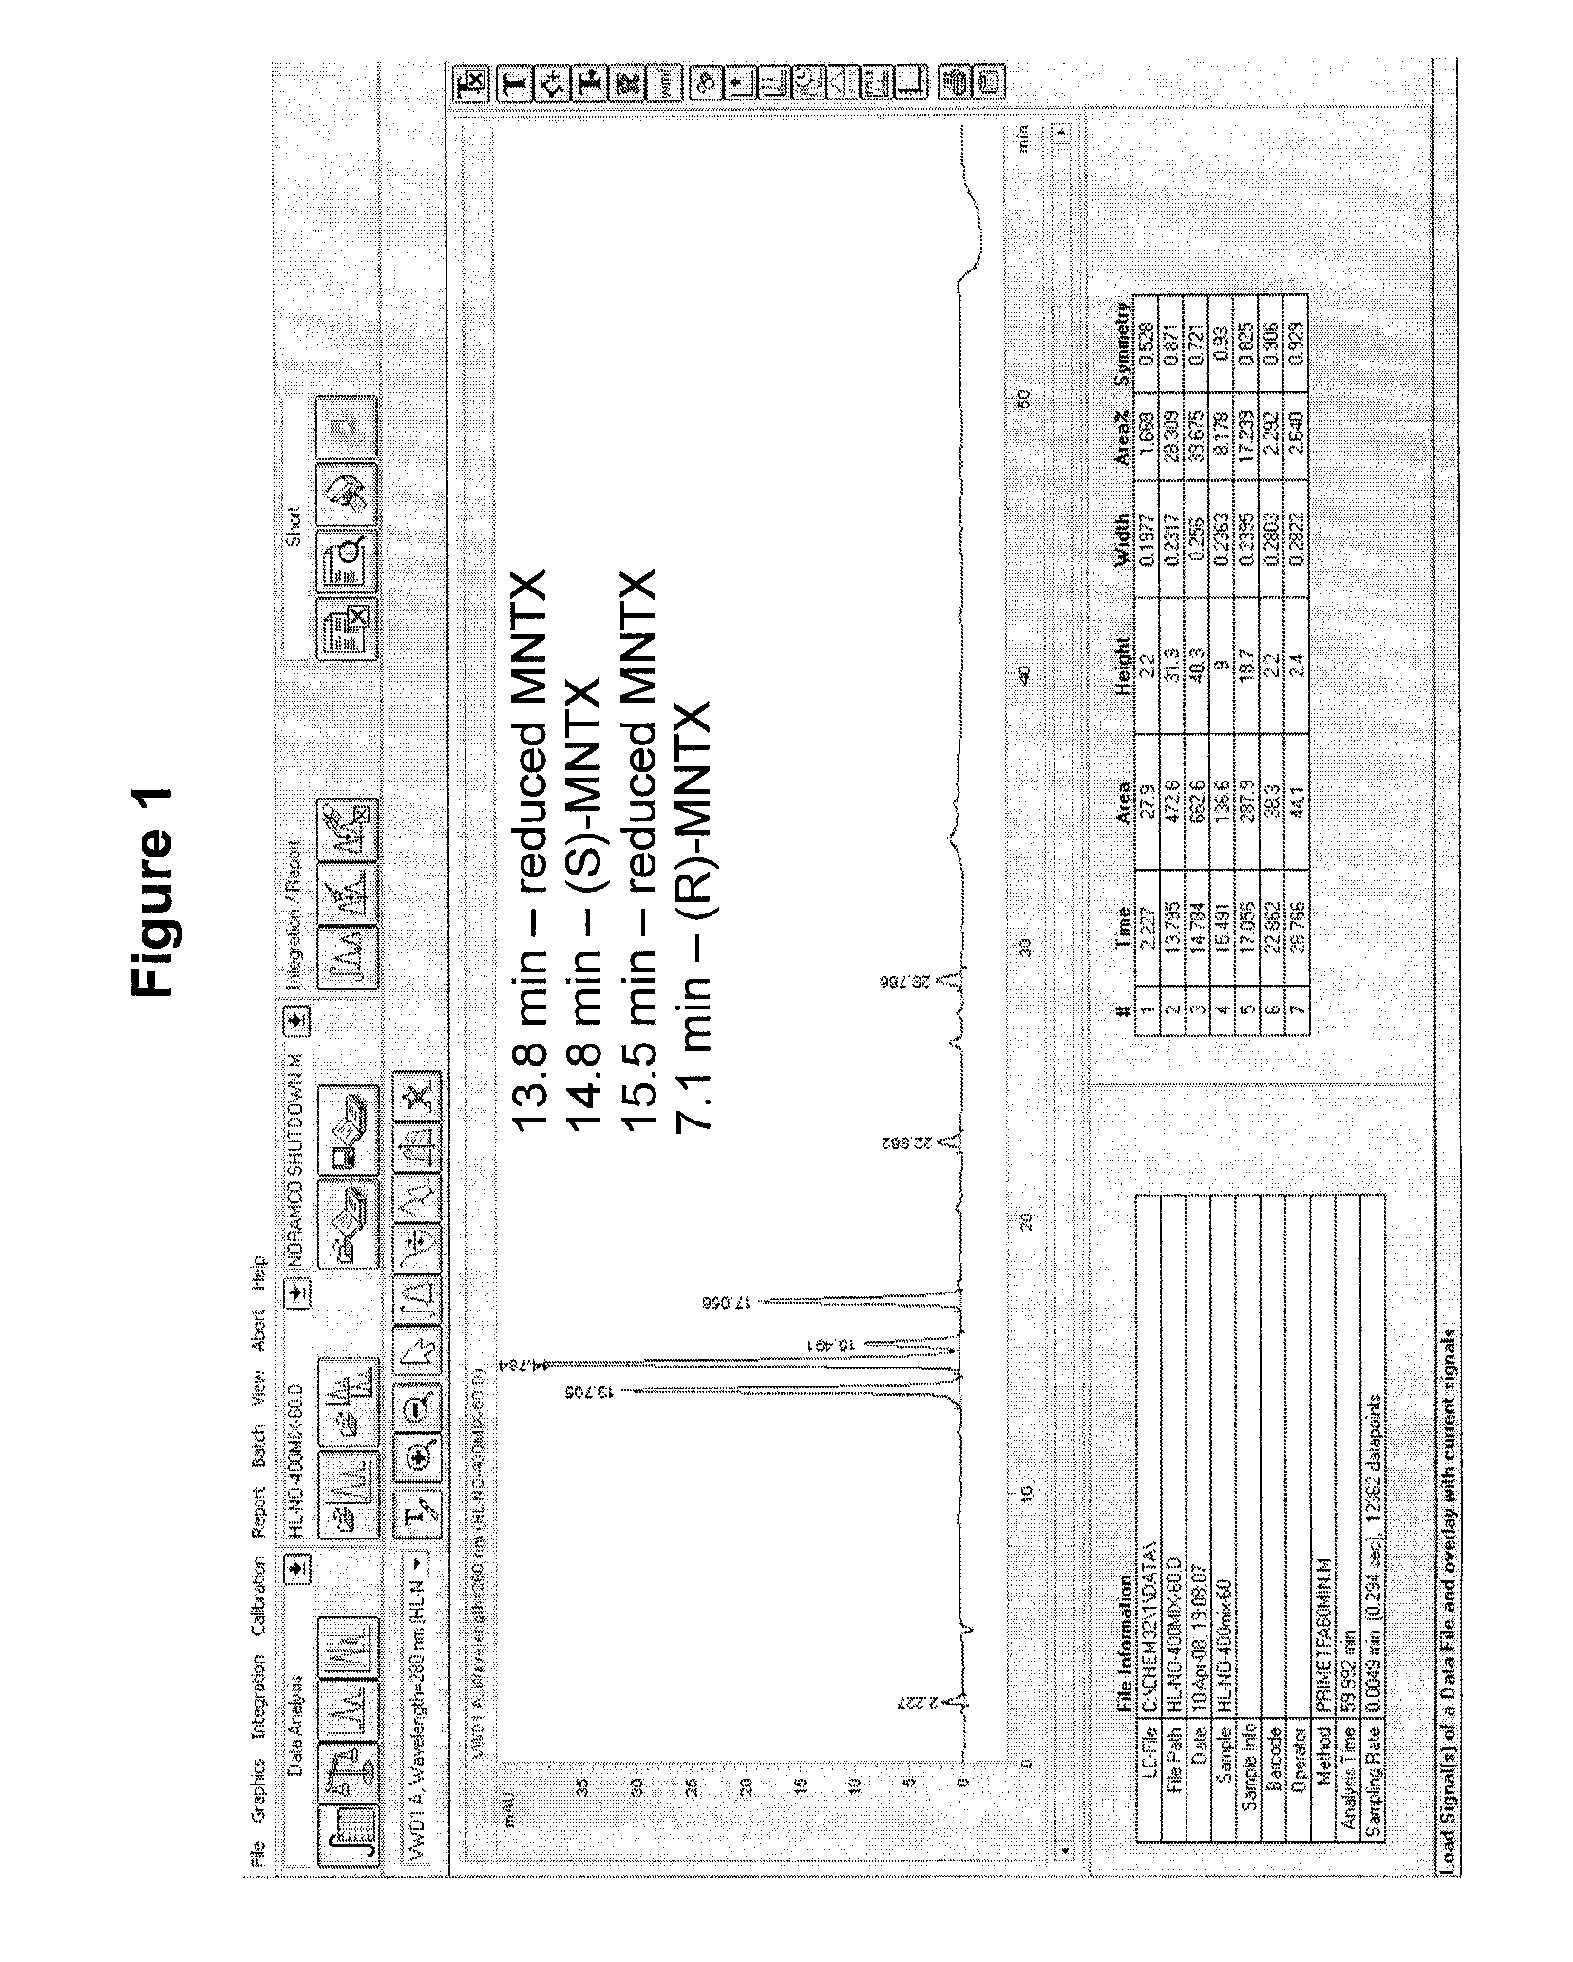 Processes for the Preparation of Morphinane and Morphinone Compounds